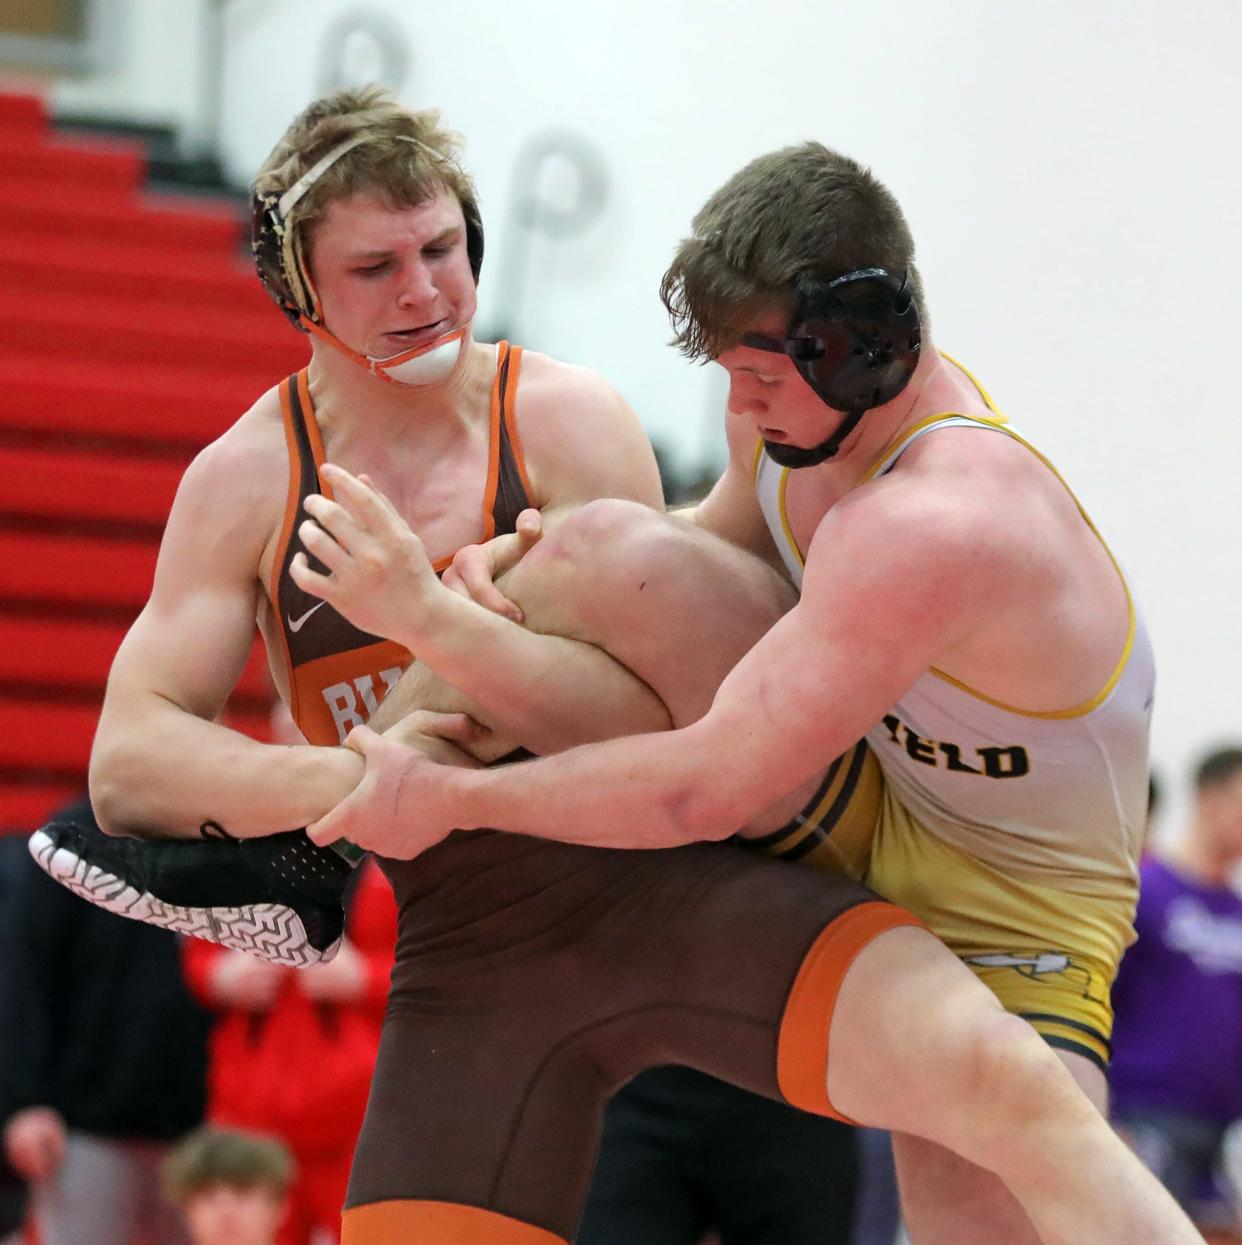 Buckeye's Eddie Neitenbach, left, looks to take down Garrettsville Garfield's Keegan Sell during the 190-pound final of the Wadsworth Grizzly Invitational Tournament on Jan. 20.